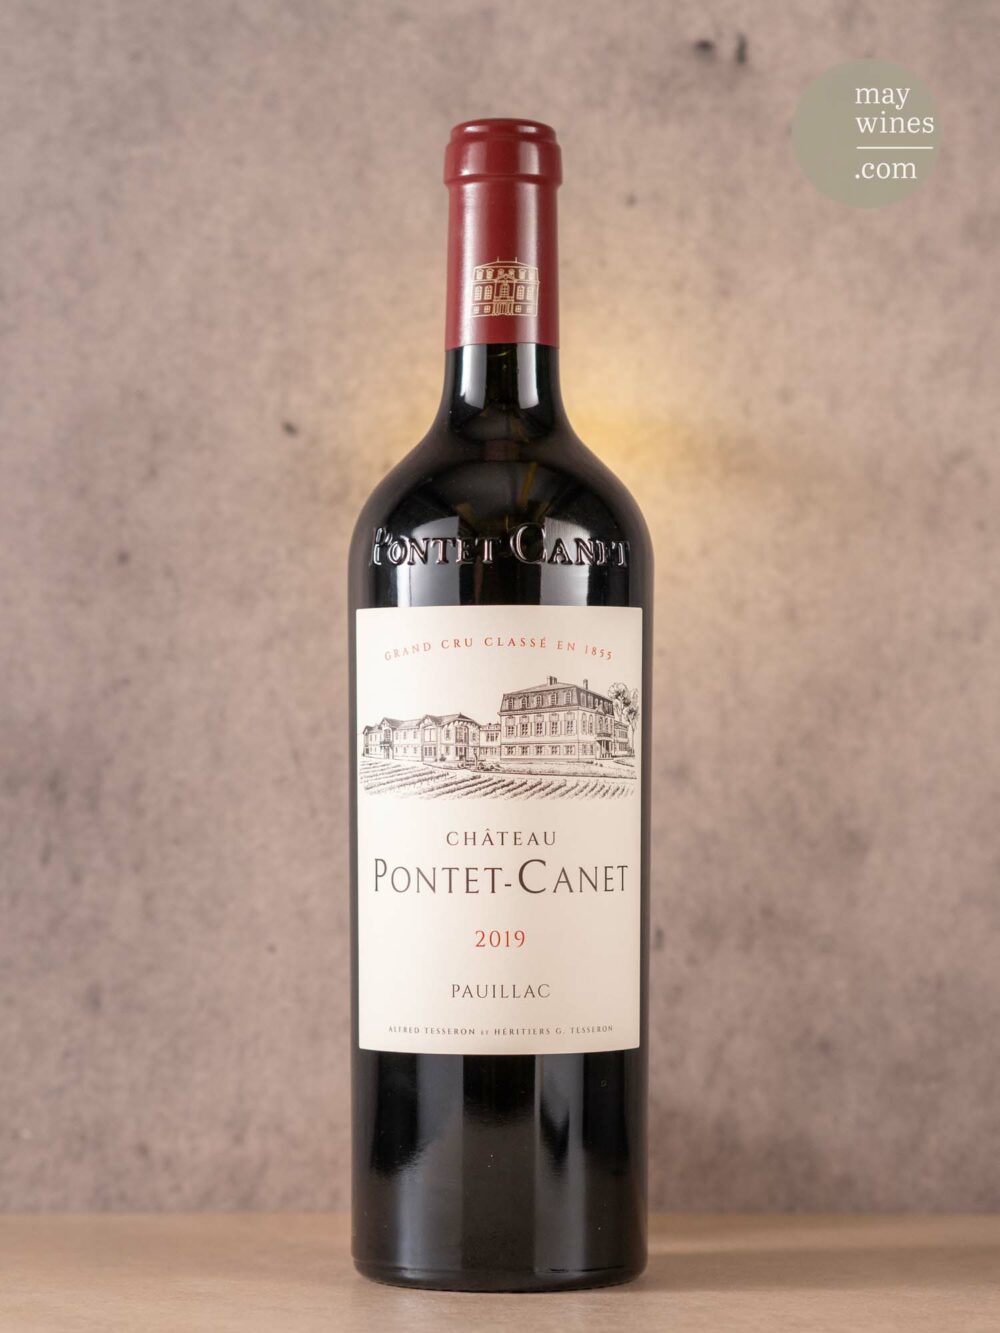 May Wines – Rotwein – 2019 Château Pontet-Canet